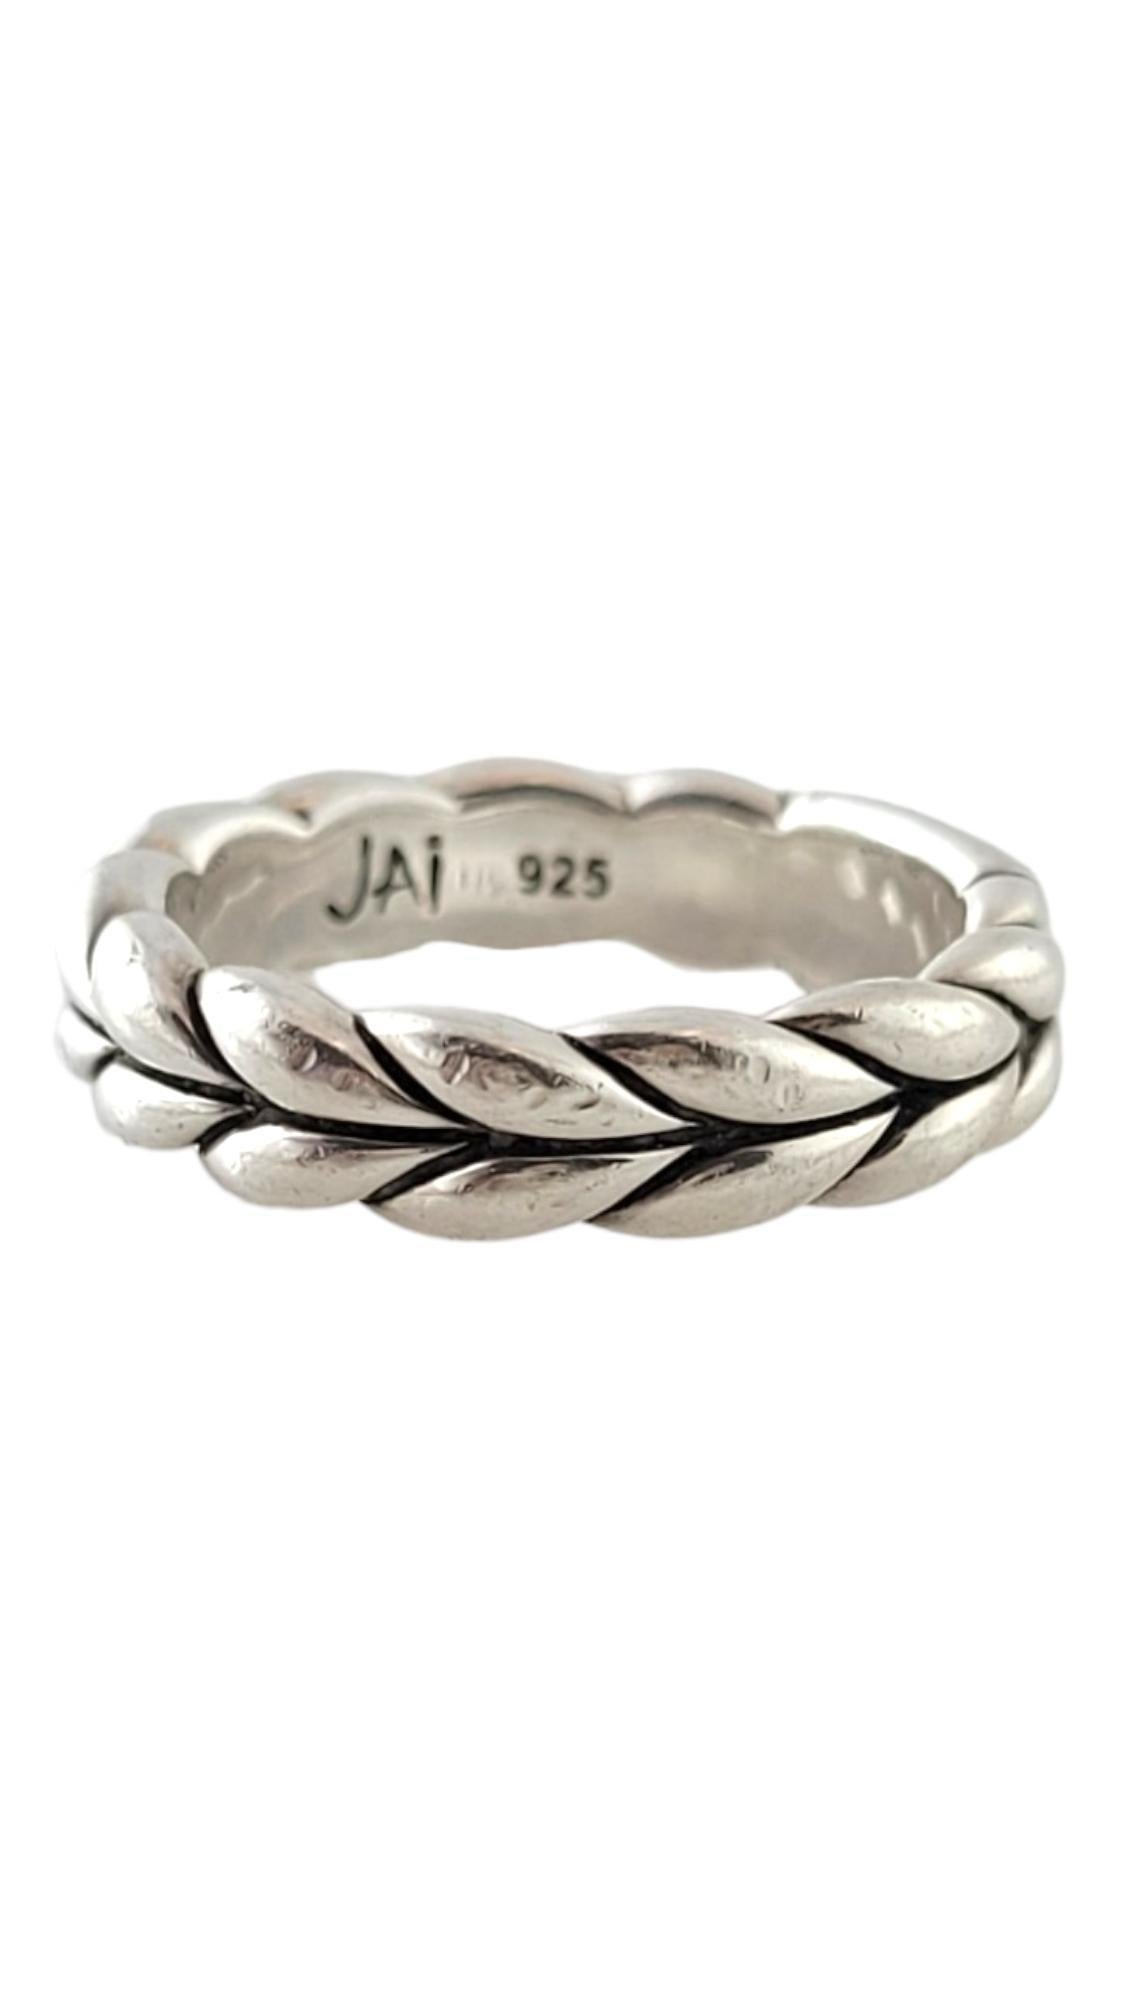 Joohn Hardy JAi Sterling Silver Classic Chain Band Size 6.25

This classic sterling silver chain band was created by designer John Hardy and has a simple but gorgeous look!

Ring size: 6.25
Shank: 4.89mm

Weight: 3.43 dwt/ 5.34 g

Hallmark: JAi 925